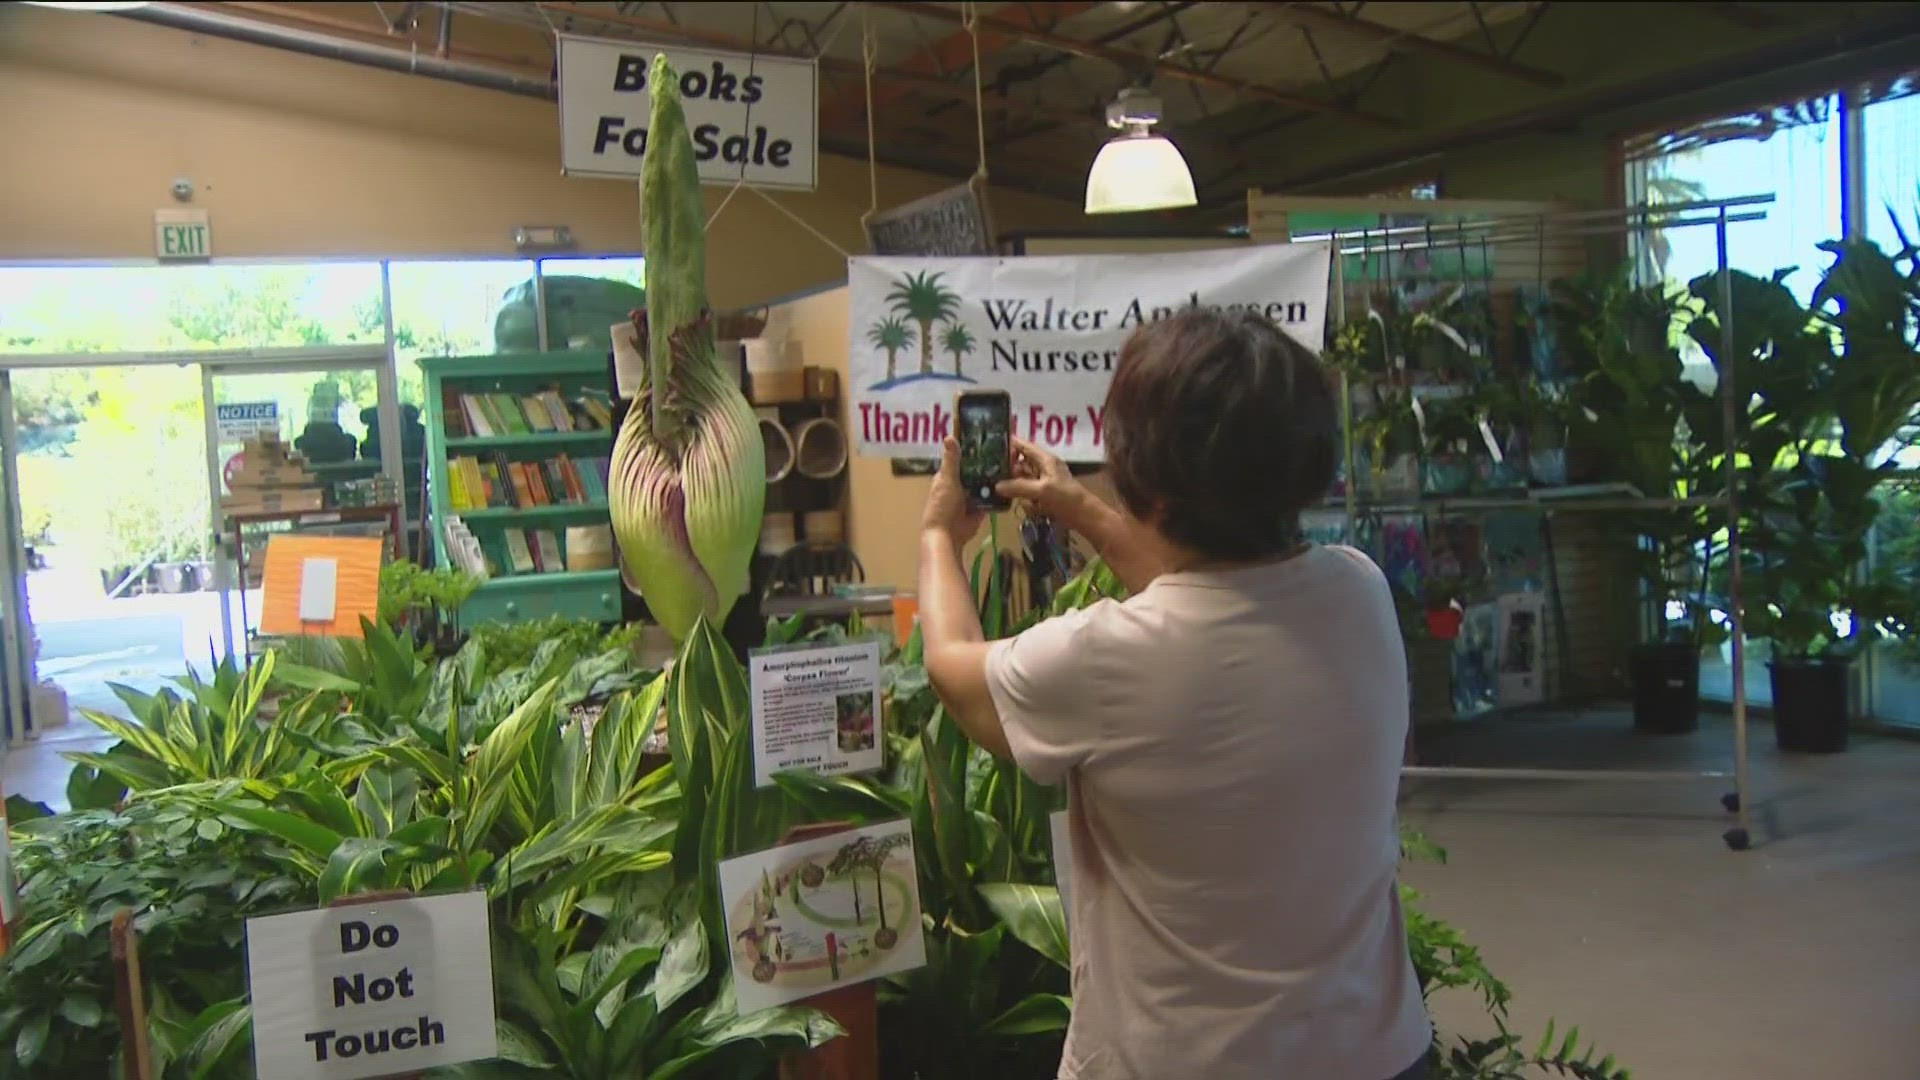 Usually, the 'Corpse Flower' is only found behind a pay location, but it's free to see at Walter Andersen Nursery.